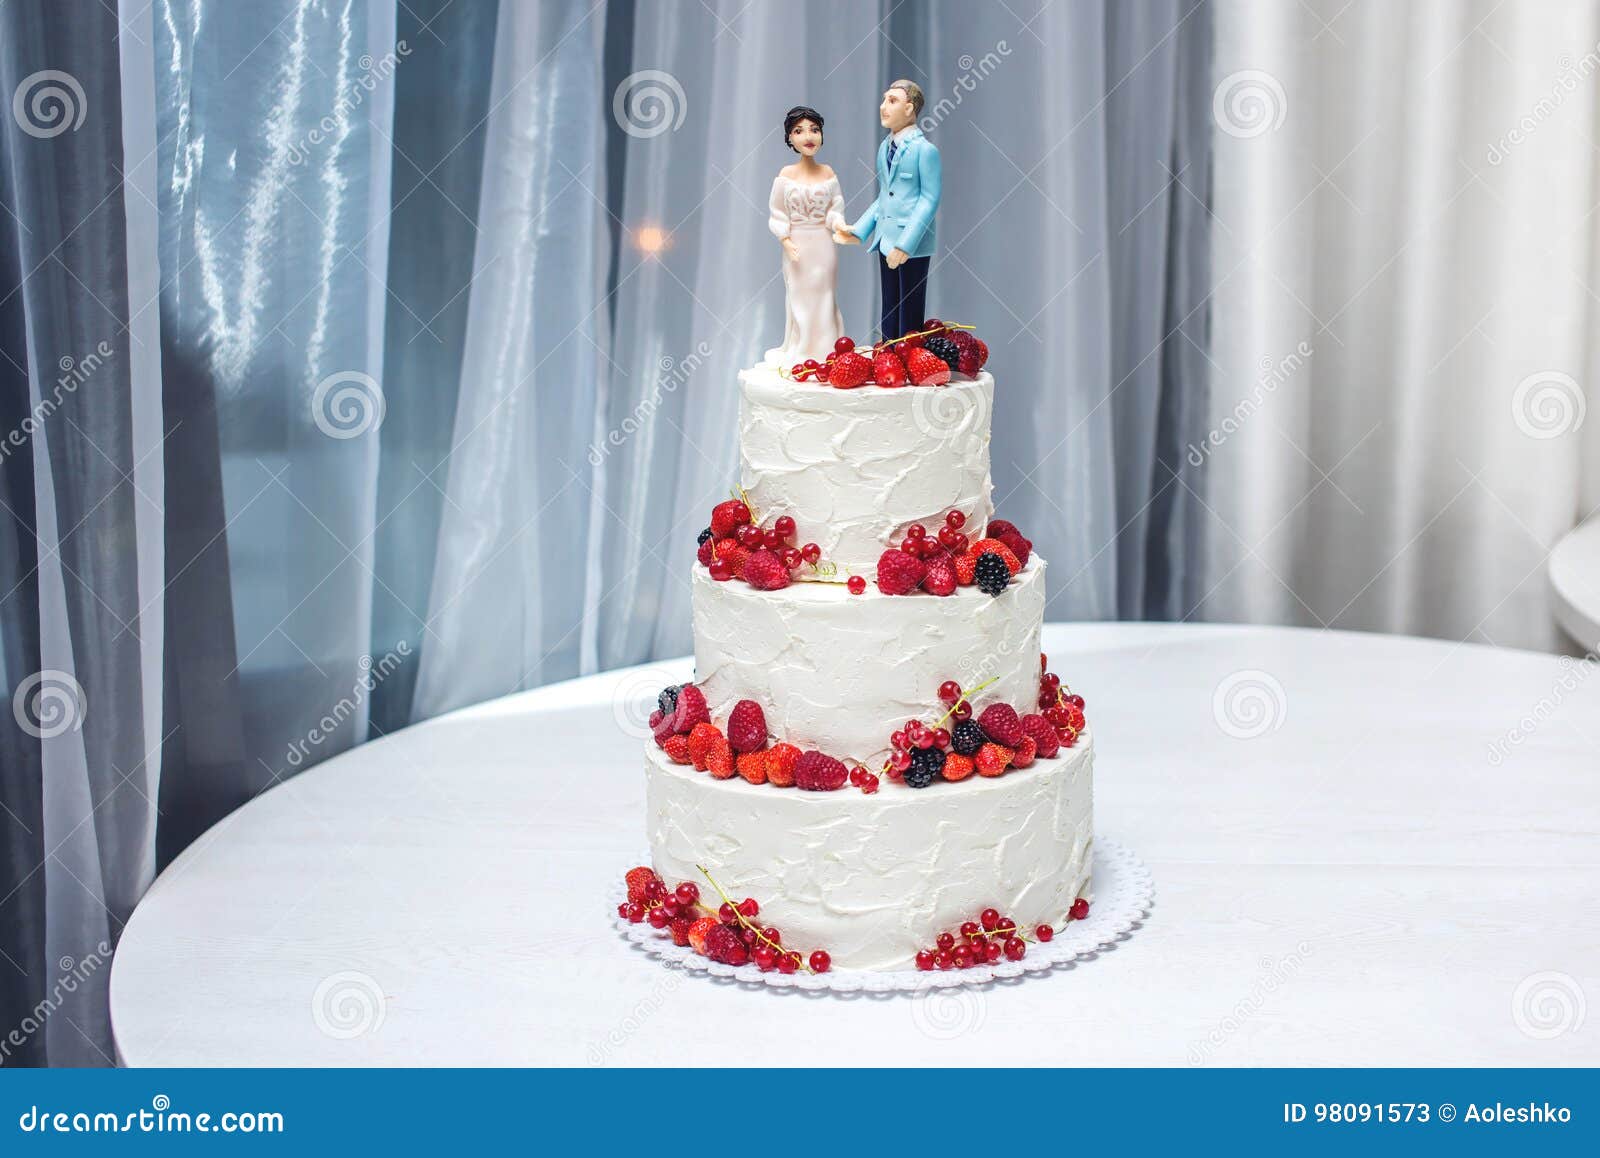 Wedding Cake With Figurines Of The Bride And Groom On Top